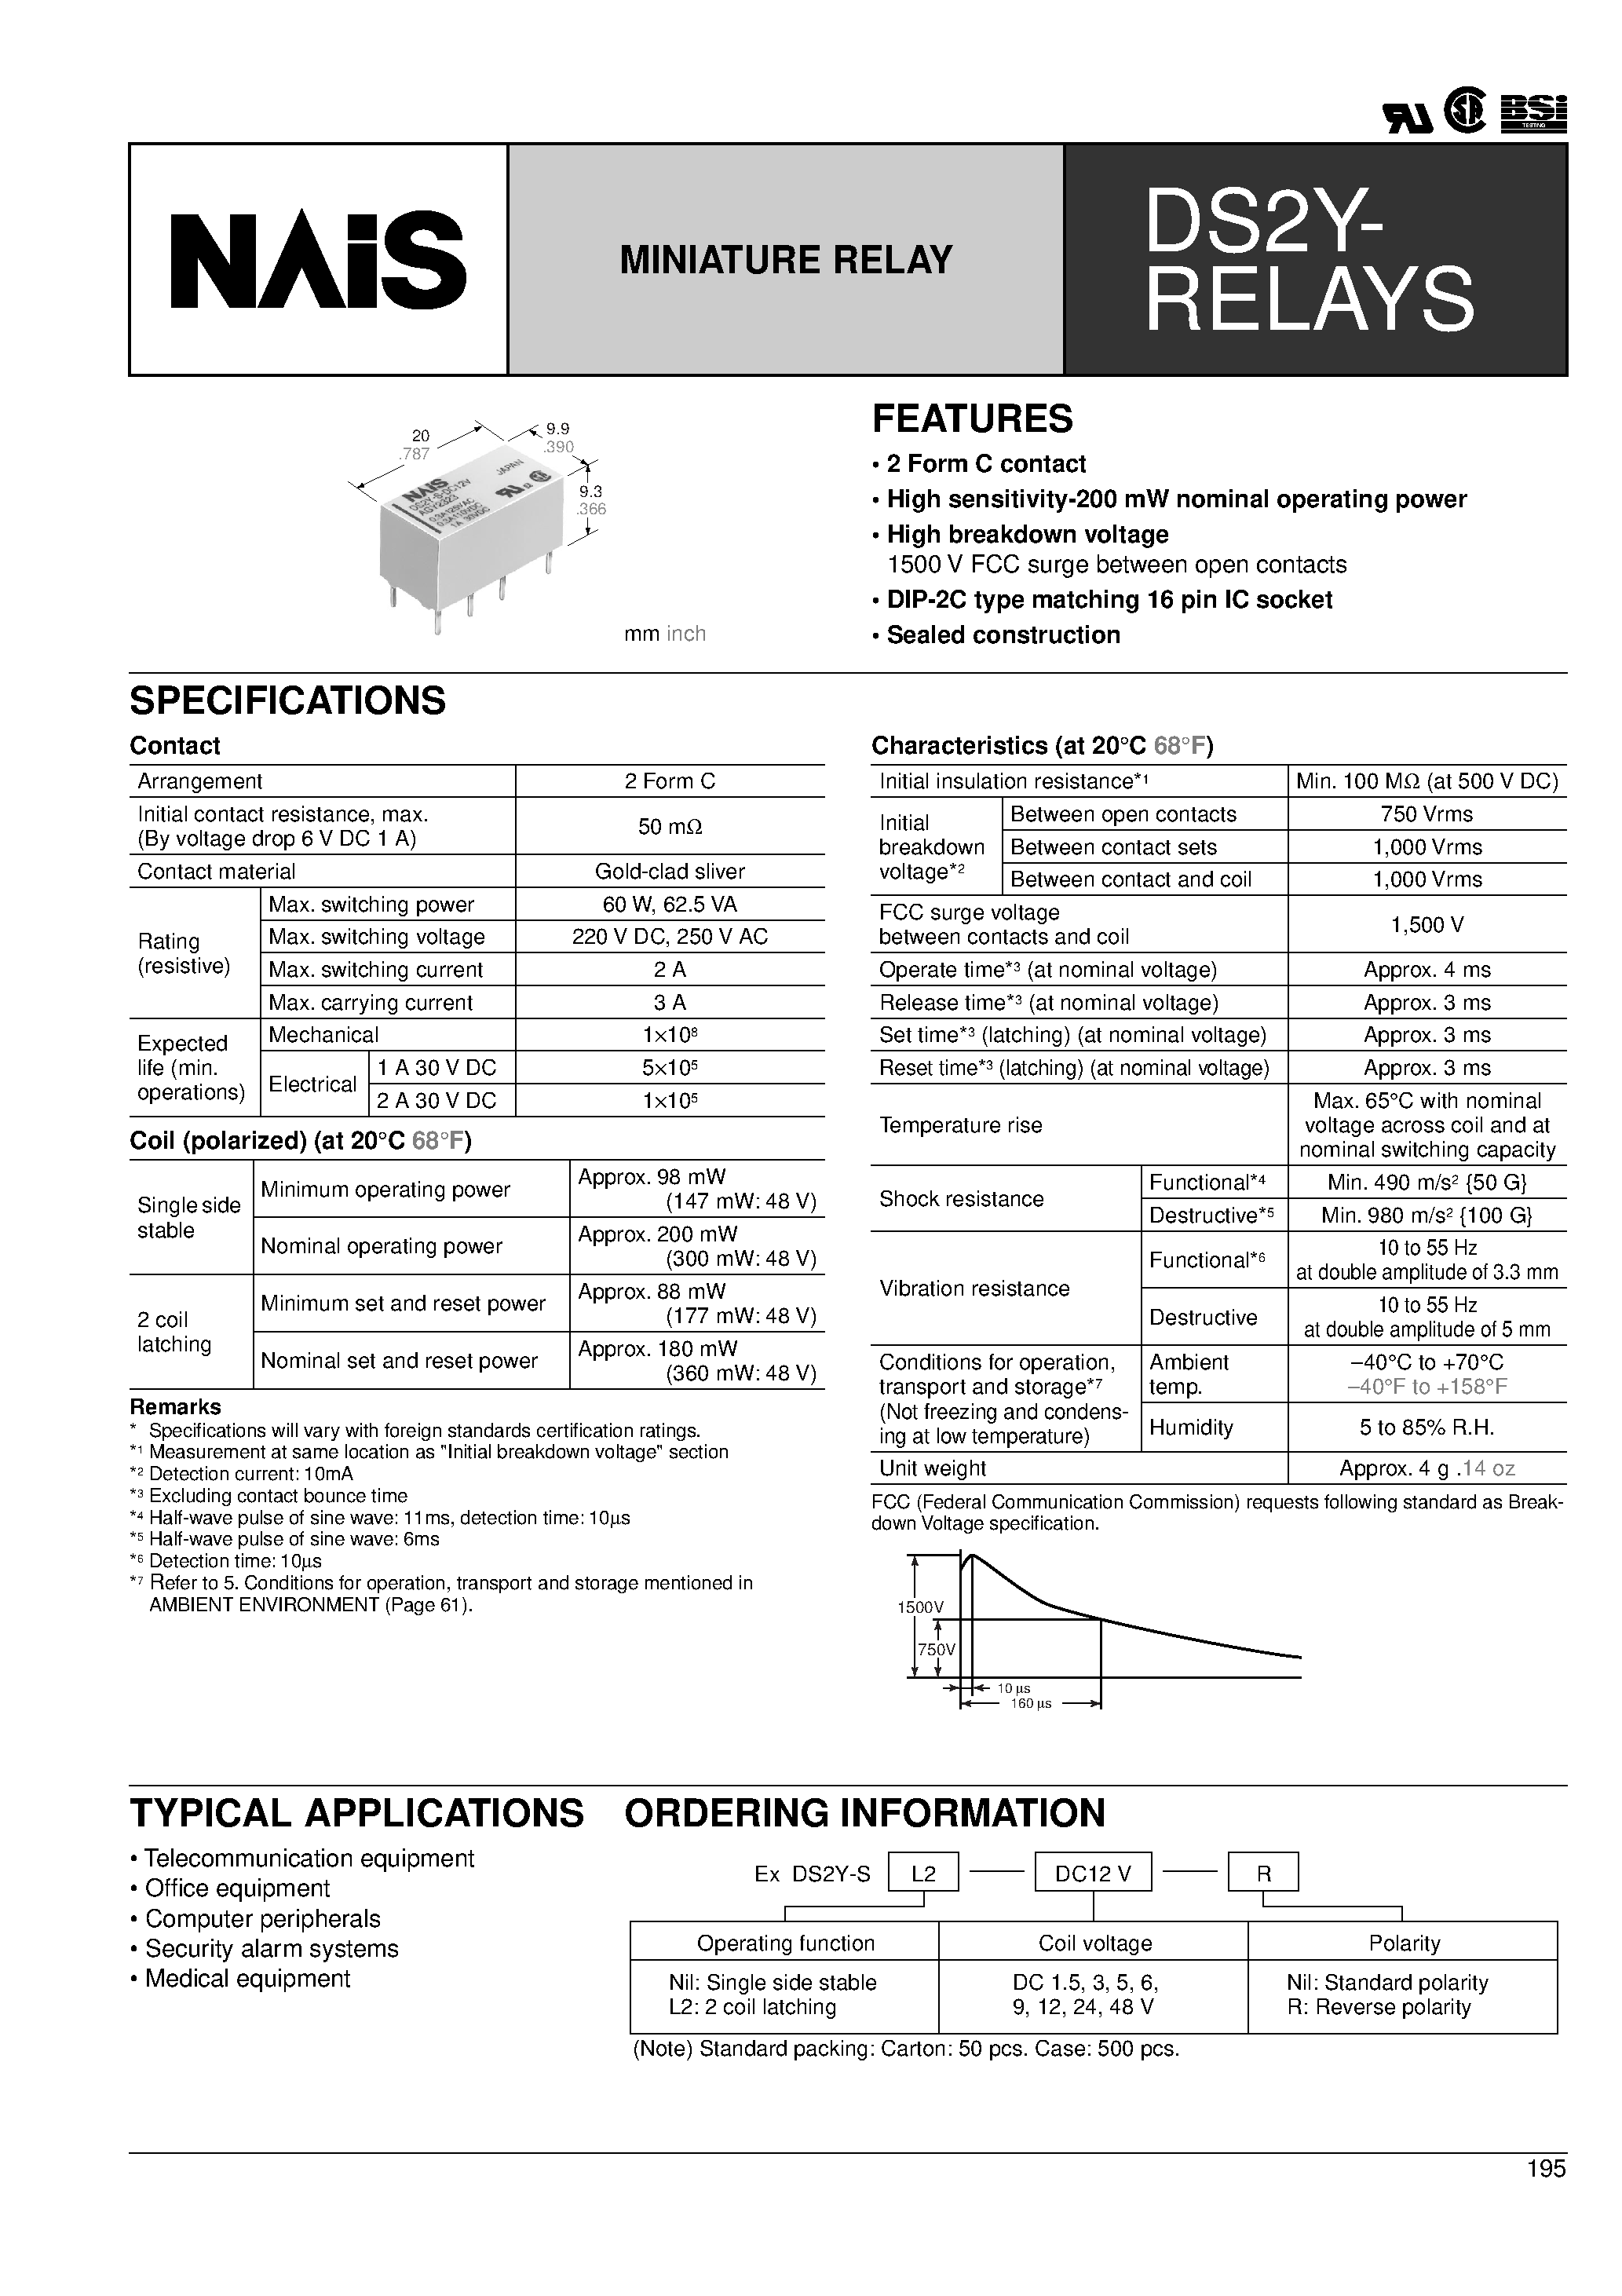 Datasheet DS2Y-S-DC5V - 2 Form C contact High sensitivity-200 mW nominal operating power page 1